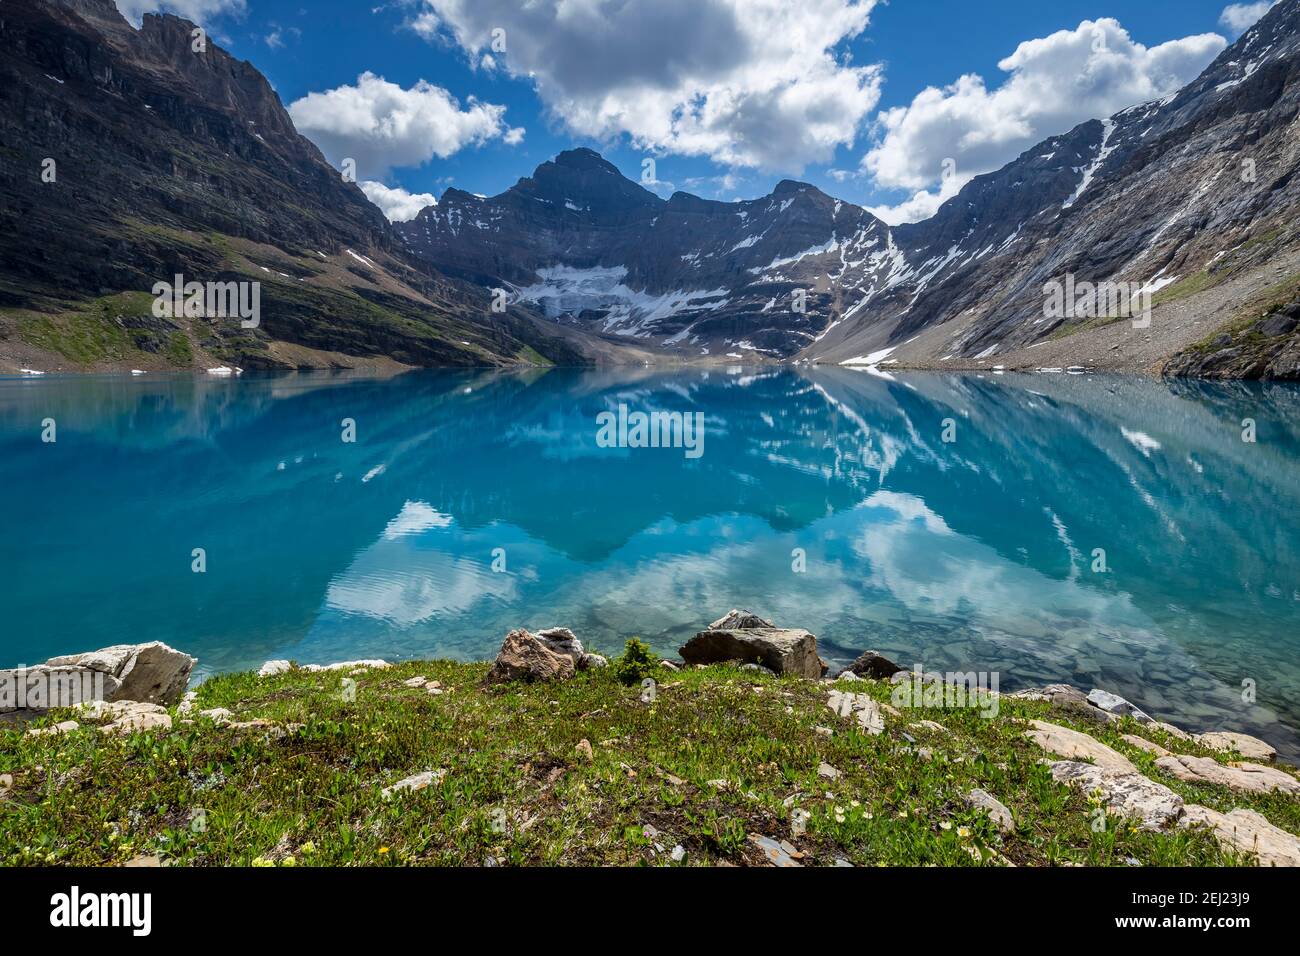 Canadian Rockies landscape of a blue lake surrounded by mountains under a blue sky with clouds during summer, British Columbia, Canada Stock Photo